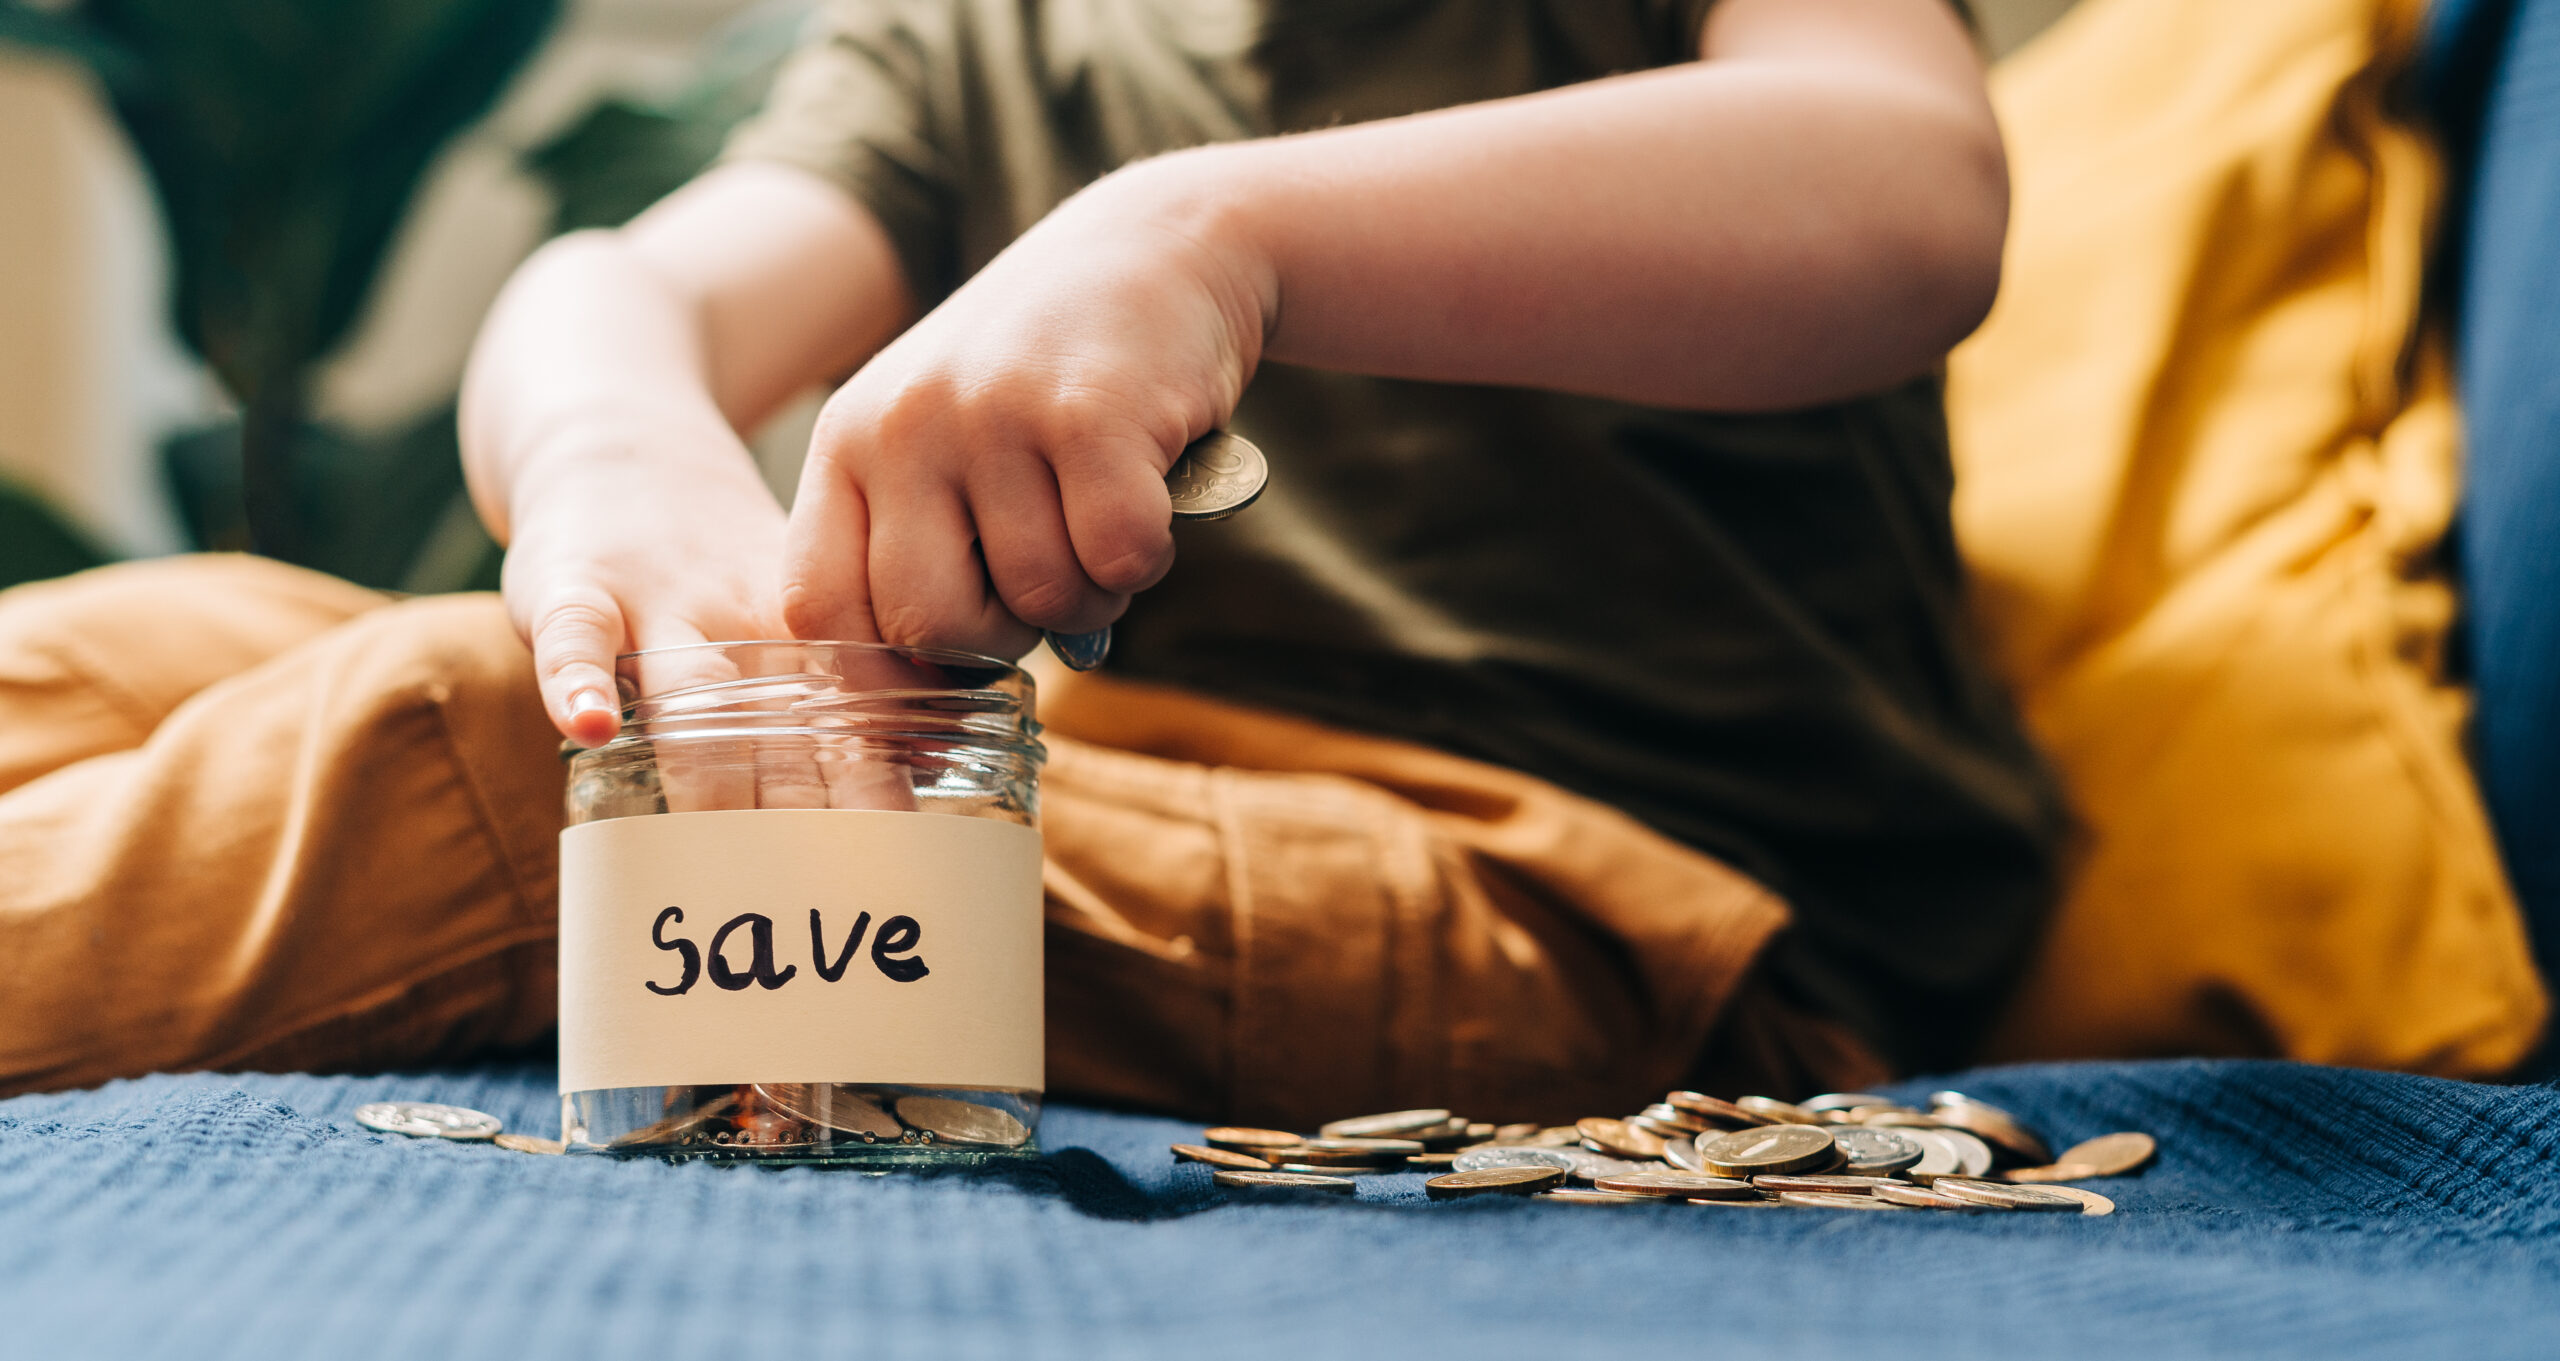 Grow your savings with Verve Round Up